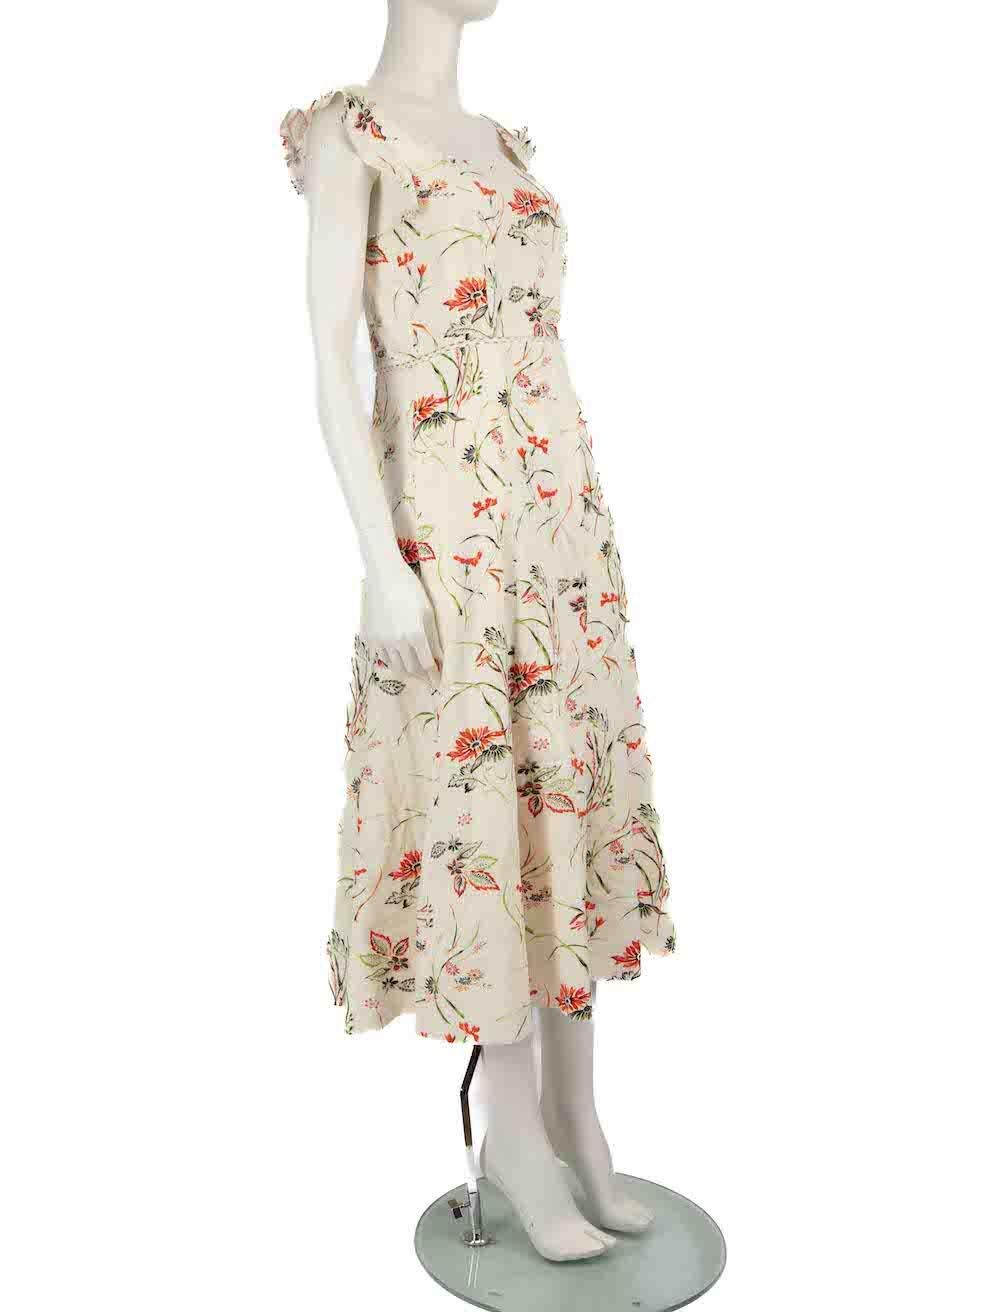 CONDITION is Very good. Hardly any visible wear to dressis evident on this used ME+EM designer resale item.
 
 
 
 Details
 
 
 Multicolour - Cream tone
 
 Linen
 
 Midi dress
 
 Floral pattern print
 
 Scalloped trim on shoulder straps
 
 Square